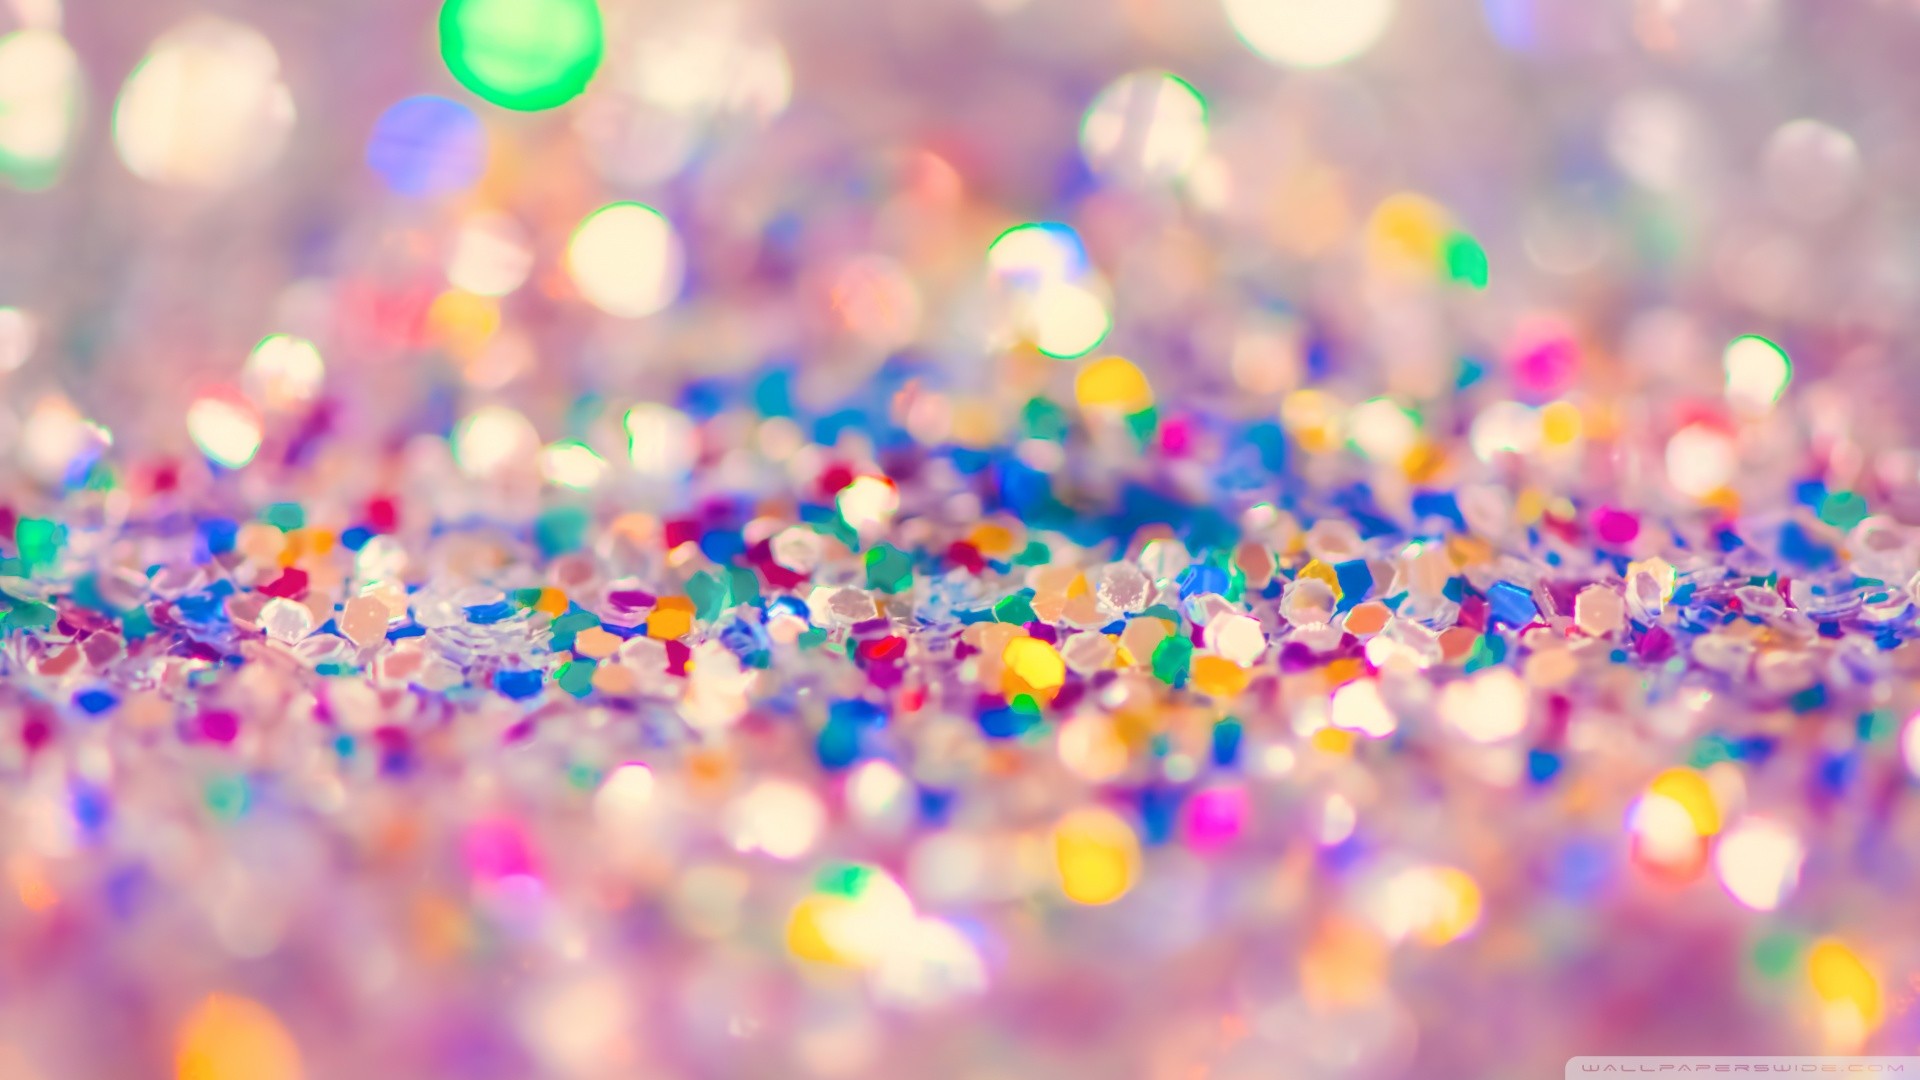 1920x1080 Free Glitter Wallpaper | Adorable Wallpapers | Pinterest | Glitter wallpaper  and Wallpaper